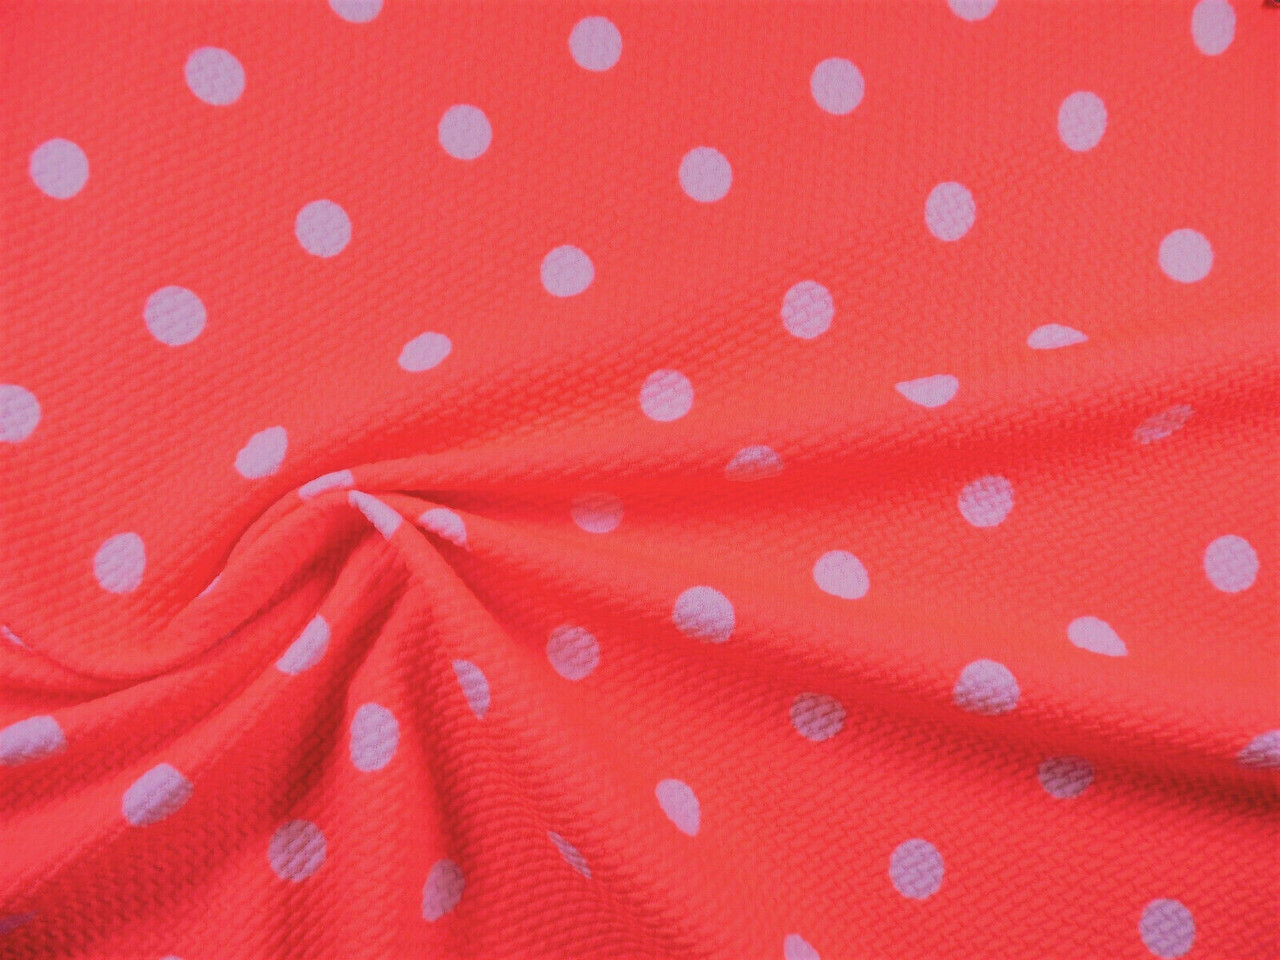 Bullet Printed Liverpool Textured Fabric Stretch Neon Coral Ivory Polka Dot P30